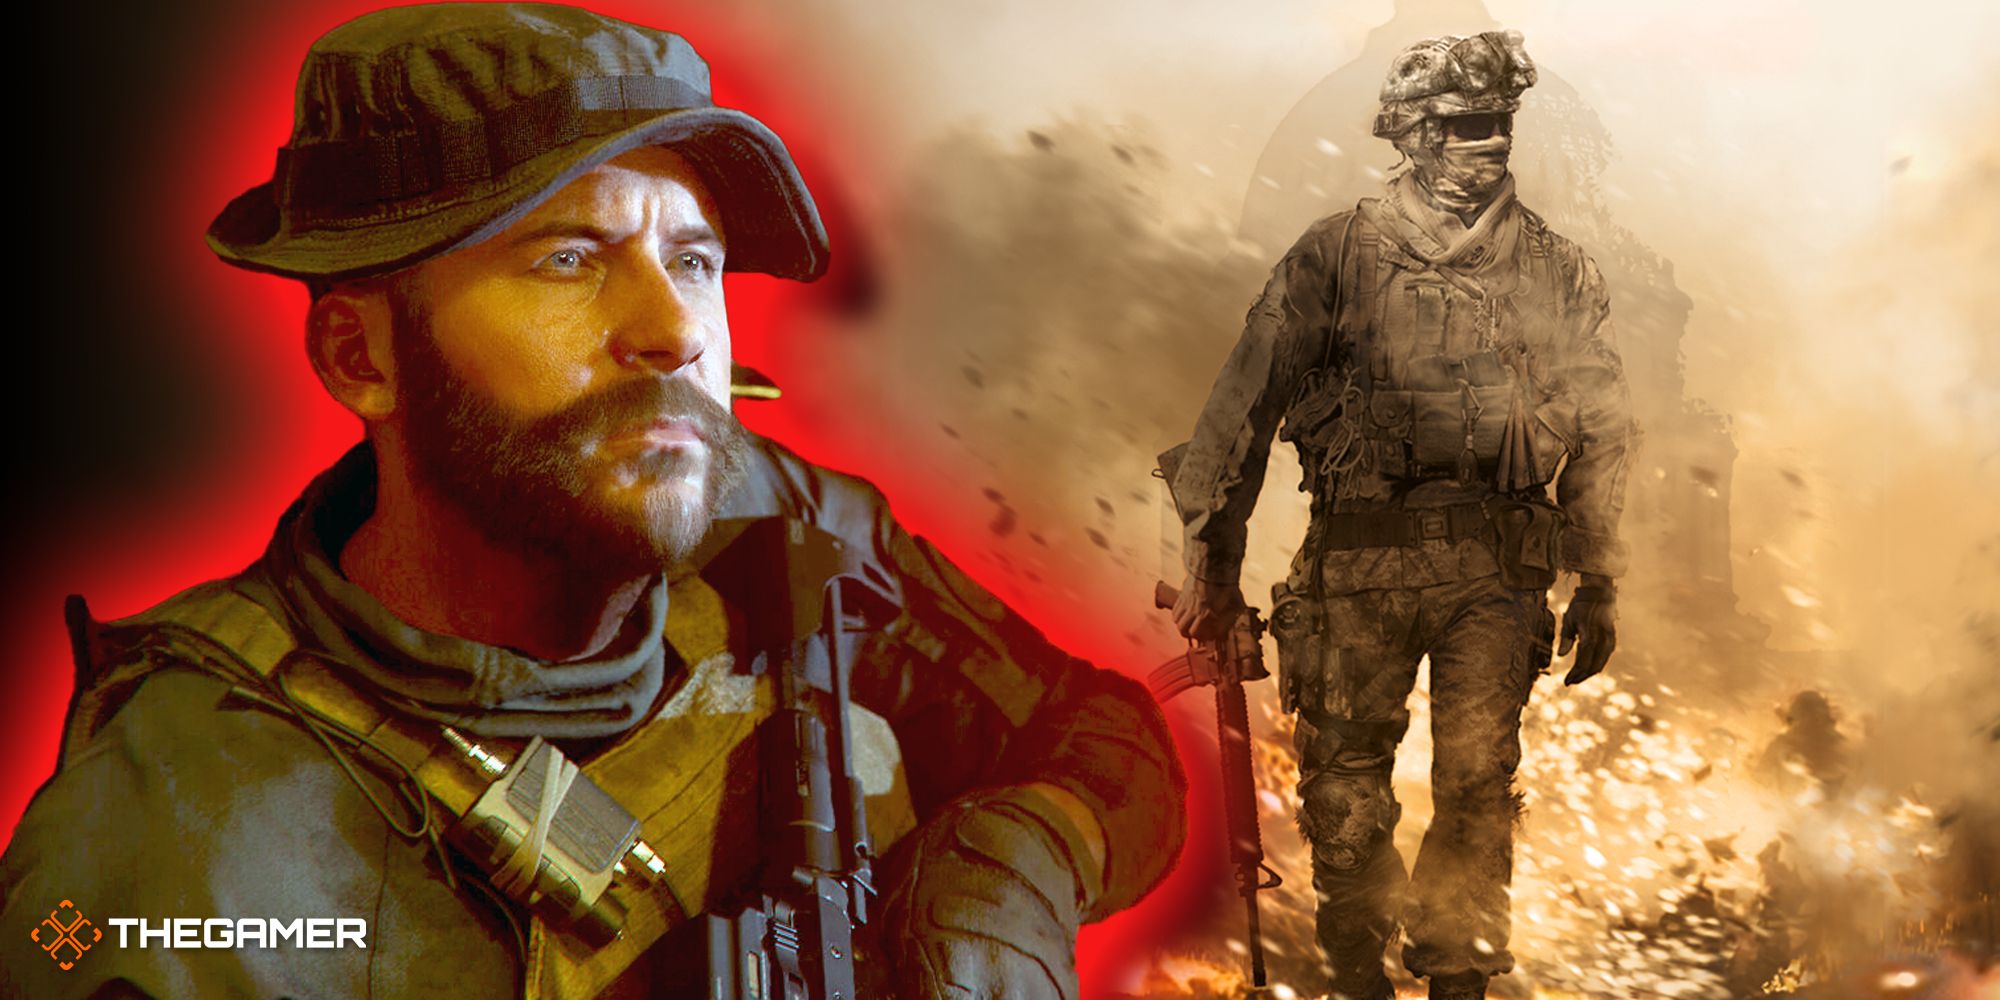 Watch Call of Duty: Next here today for our first look at Modern